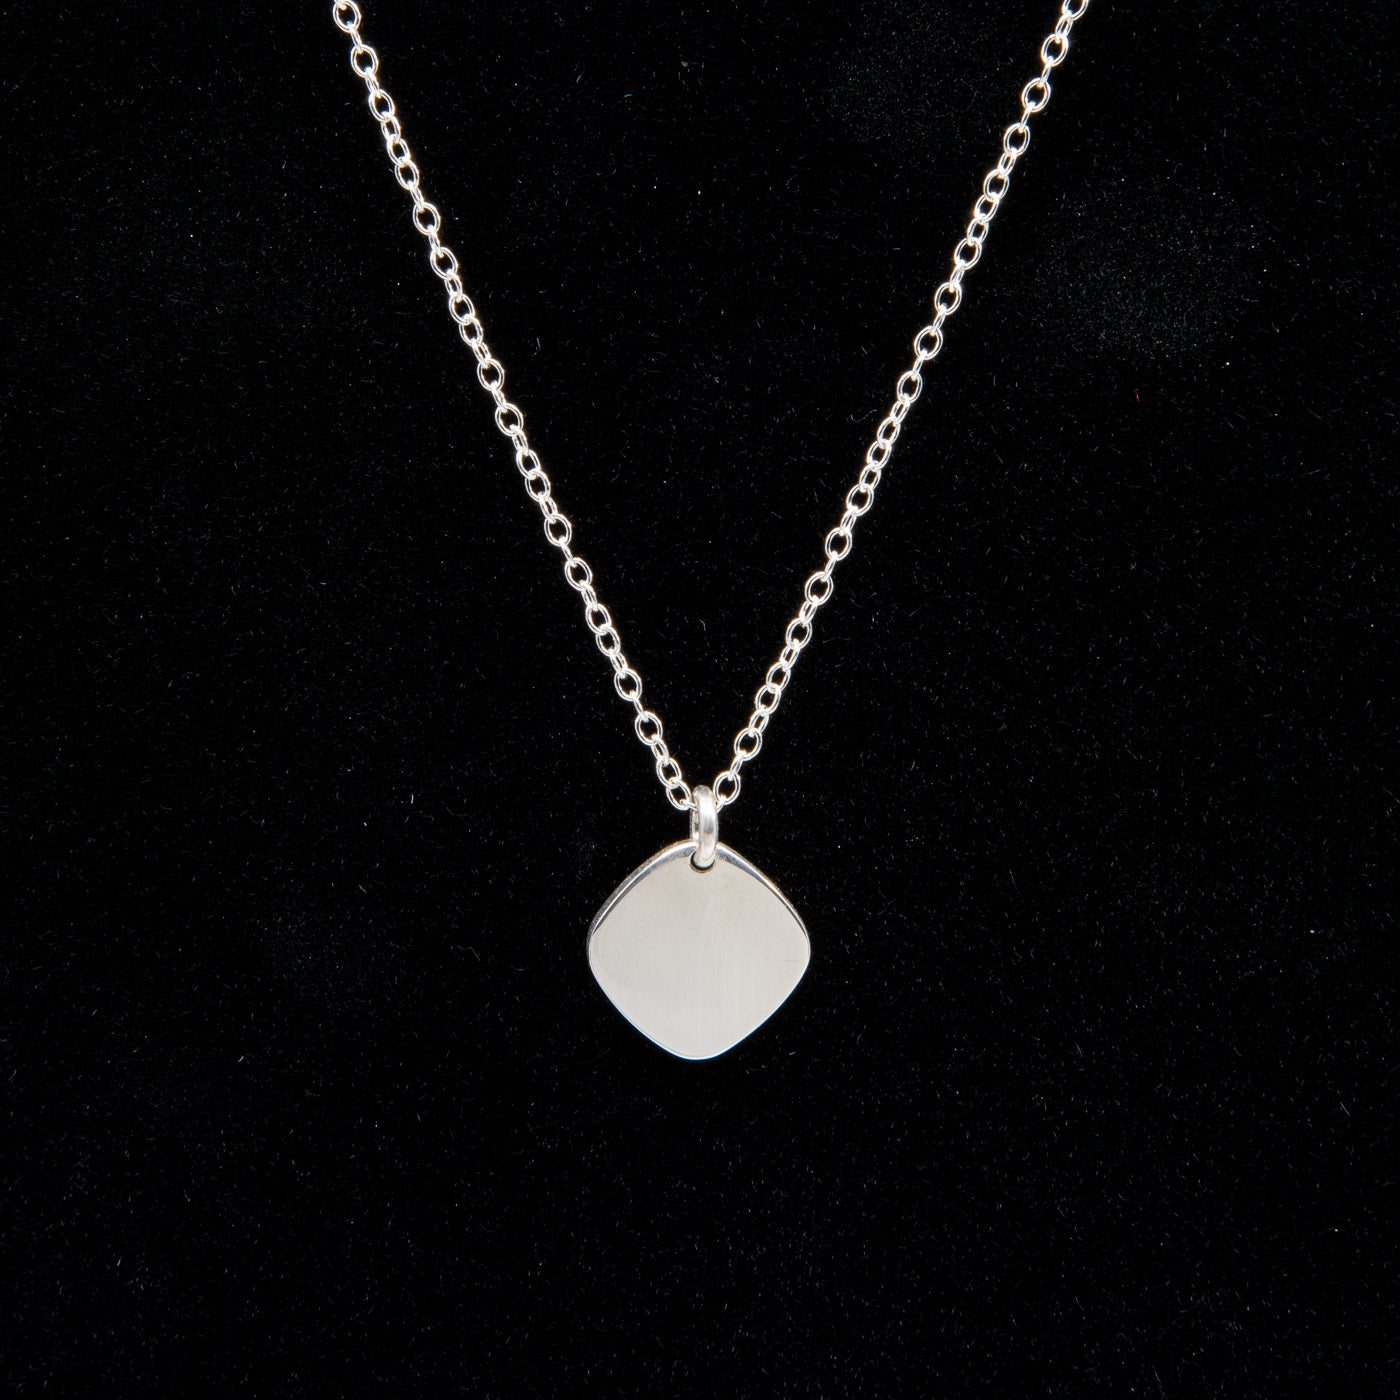 Small Bennu sterling silver pendant necklace